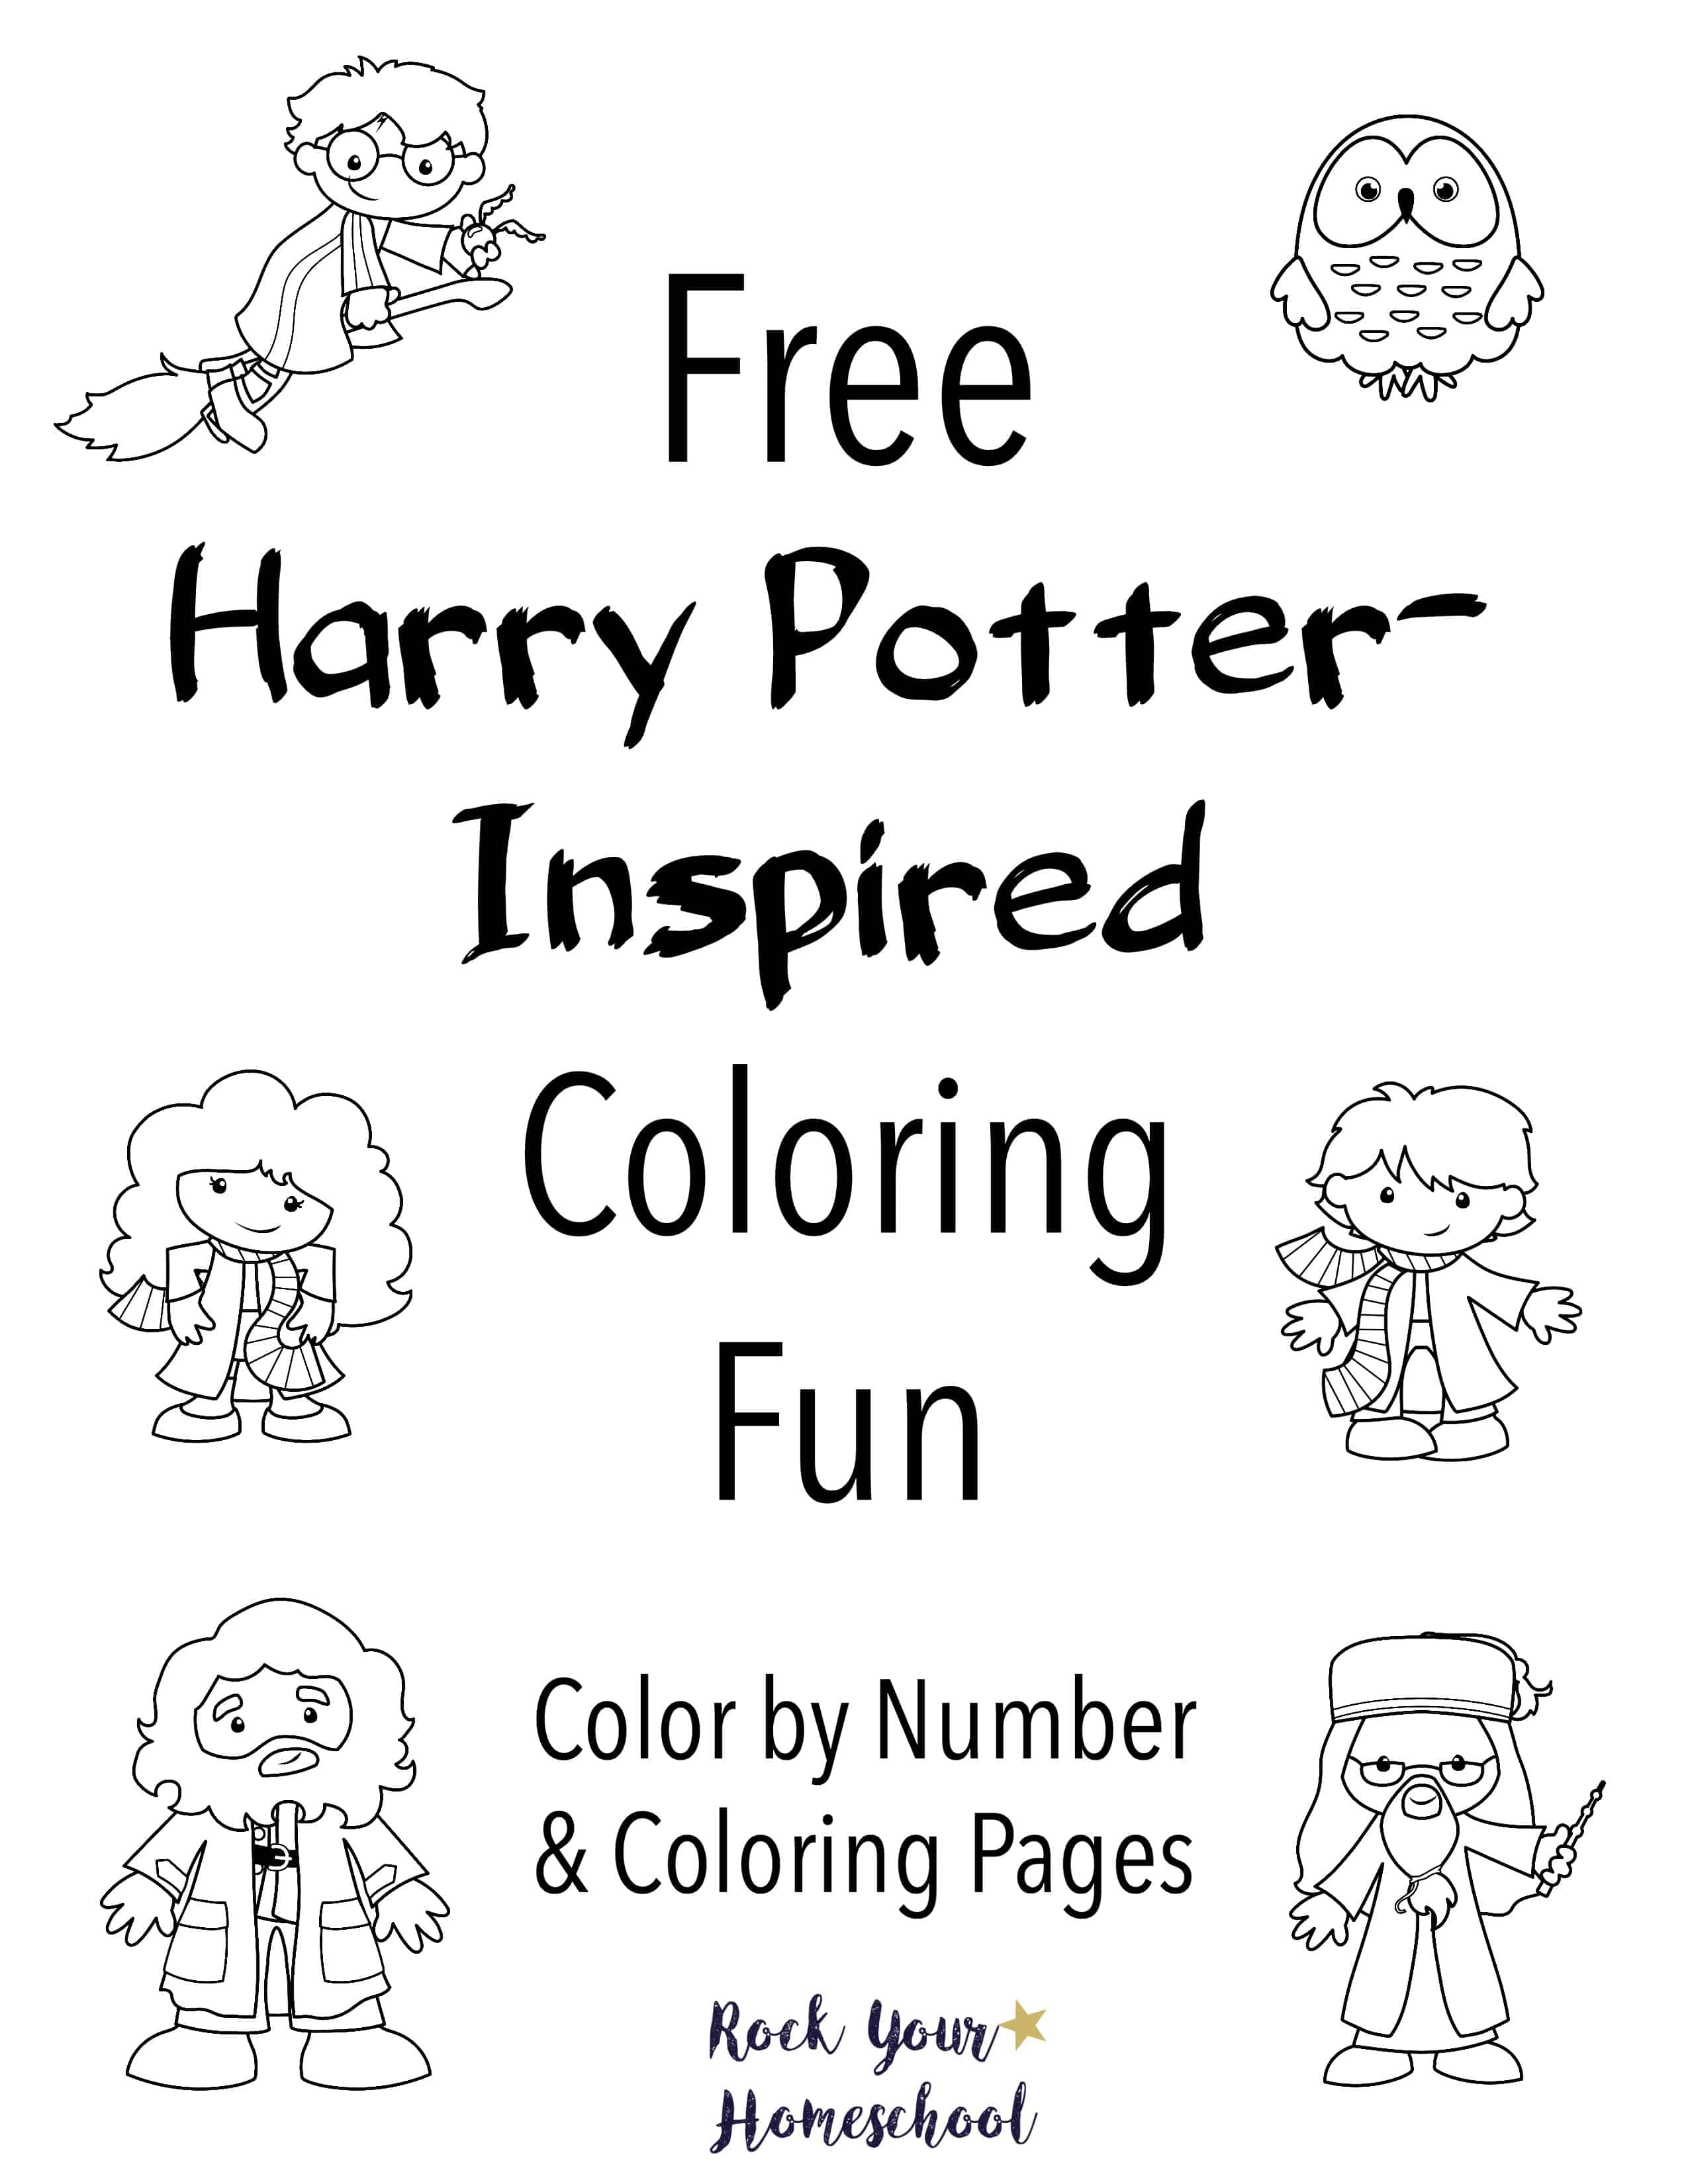 Lightning Bolt Coloring Page Free Harry Potter Inspired Coloring Fun Rock Your Homeschool